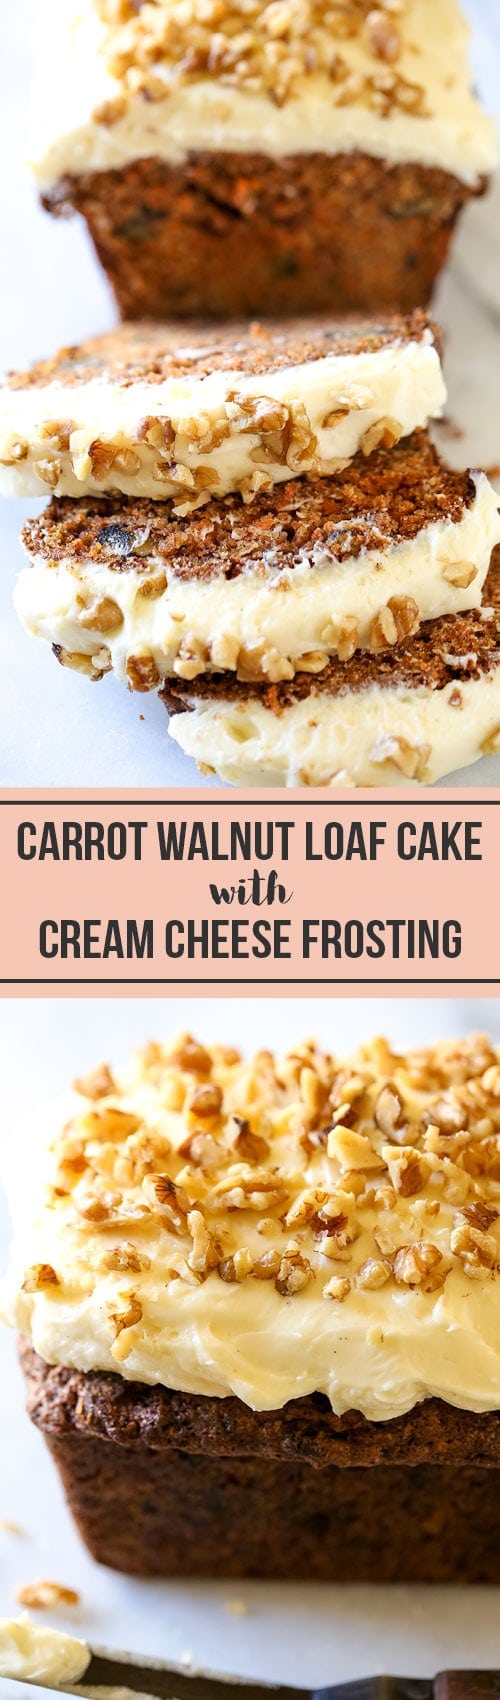 The PERFECT recipe for spring baking! Even carrot haters love this! It's moist, tender, and bursting with flavor. Perfect for gifting, too!